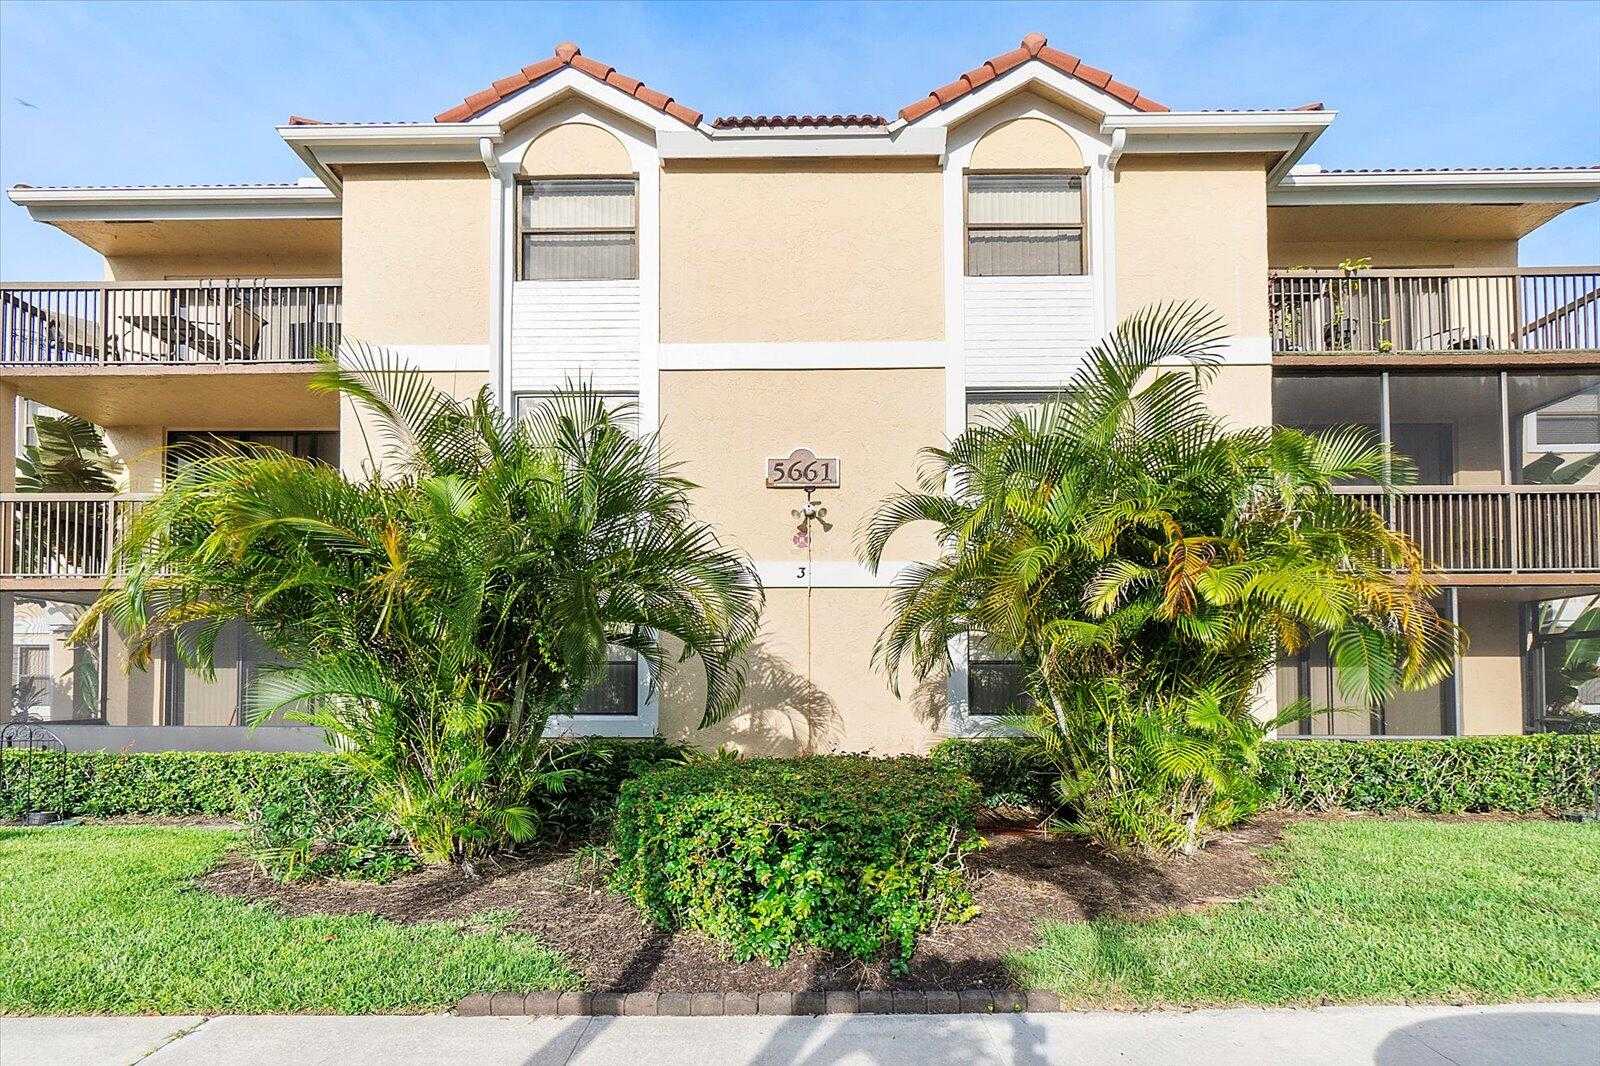 View Coral Springs, FL 33067 residential property